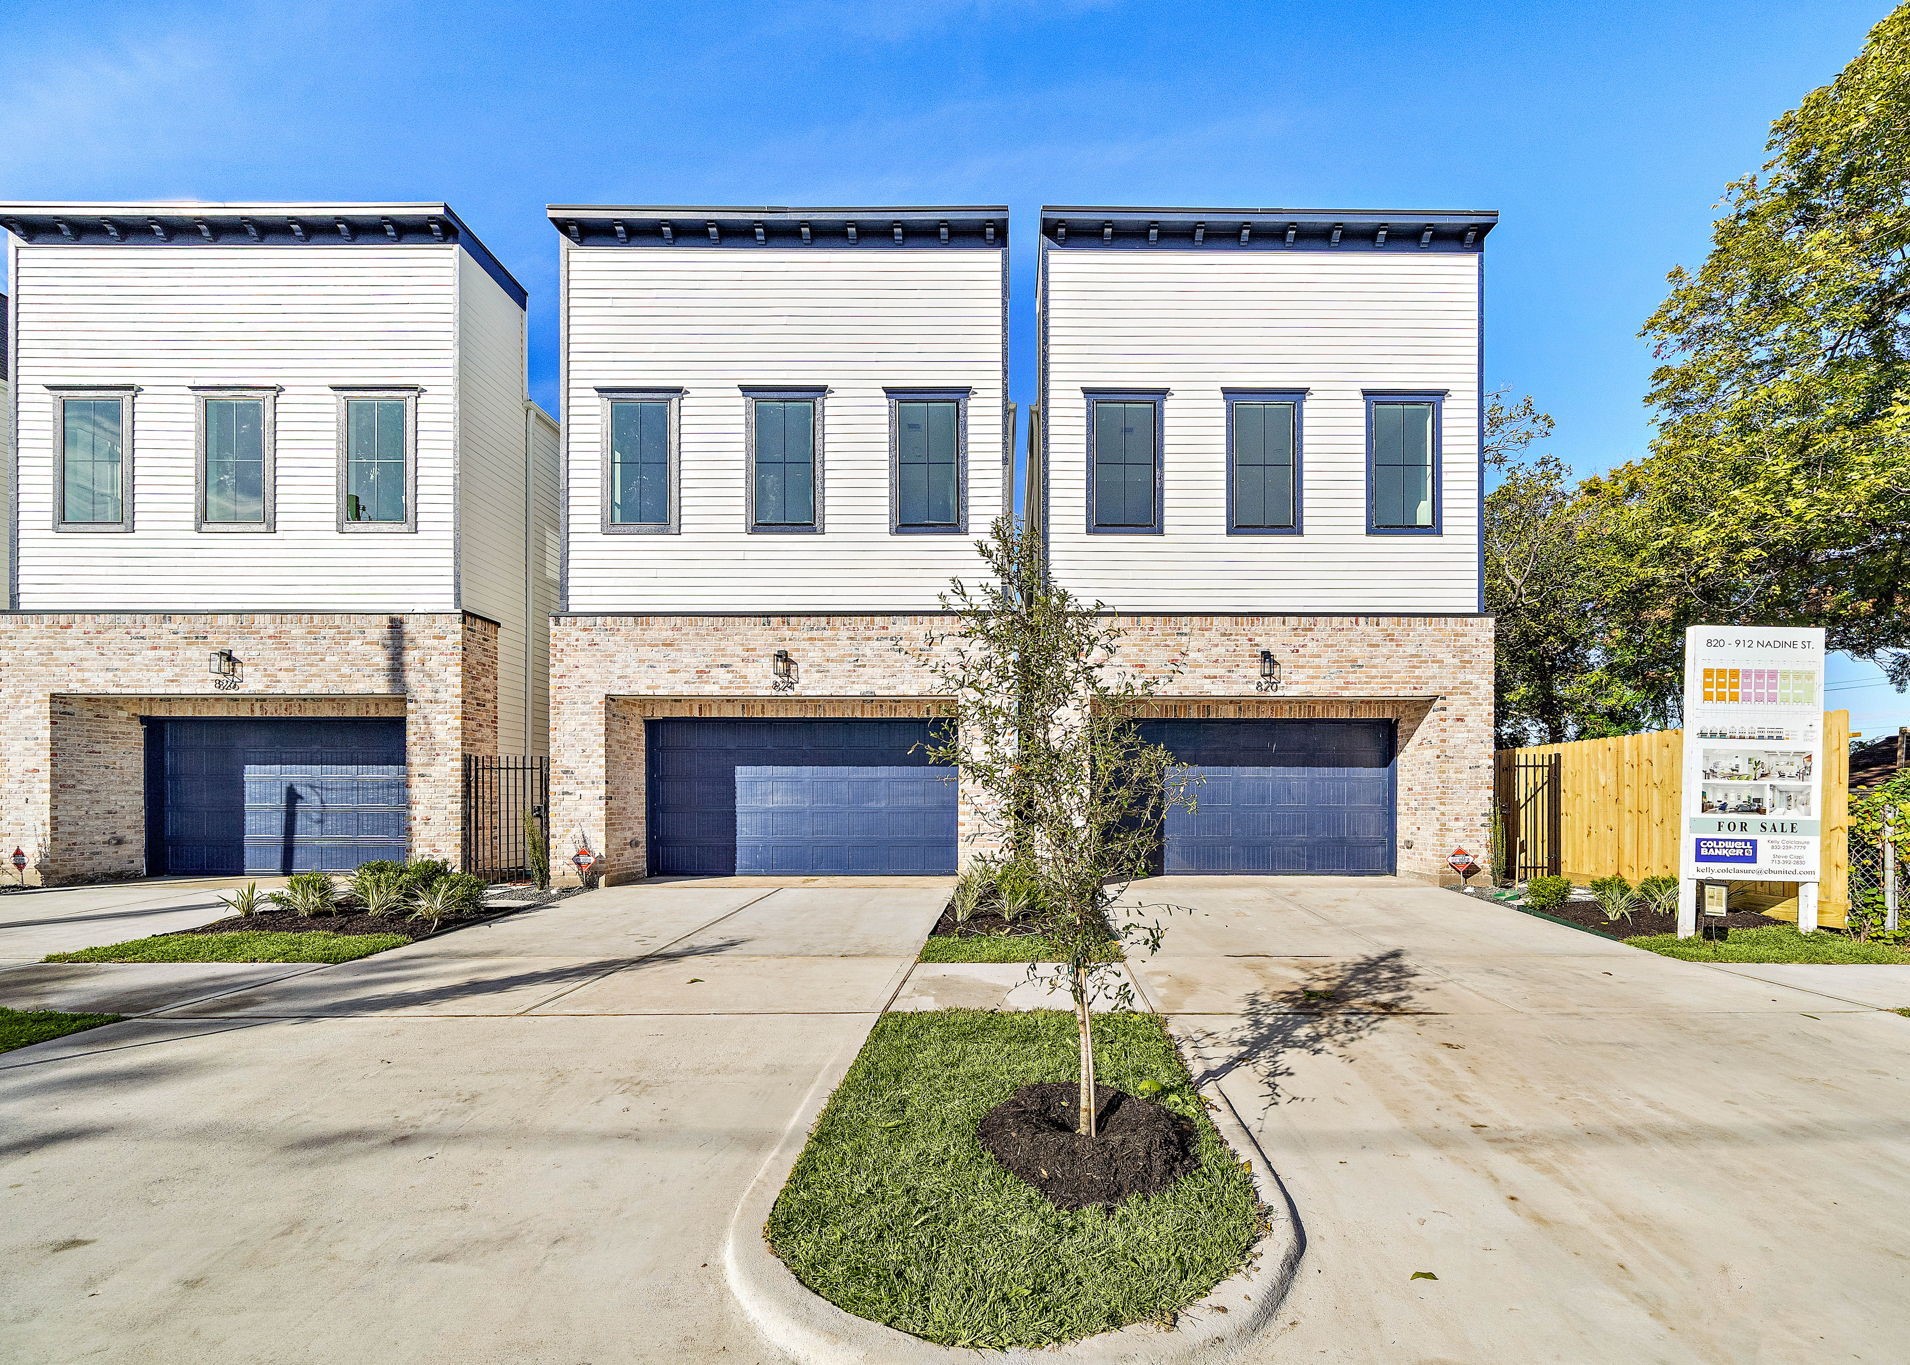 Impressive 3-bedroom, 2.5 bath new construction home in the Heights, expected completion in the beginning of December. Desirable 1st-floor living, stylish brick accenting, private driveway, and a spacious yard.